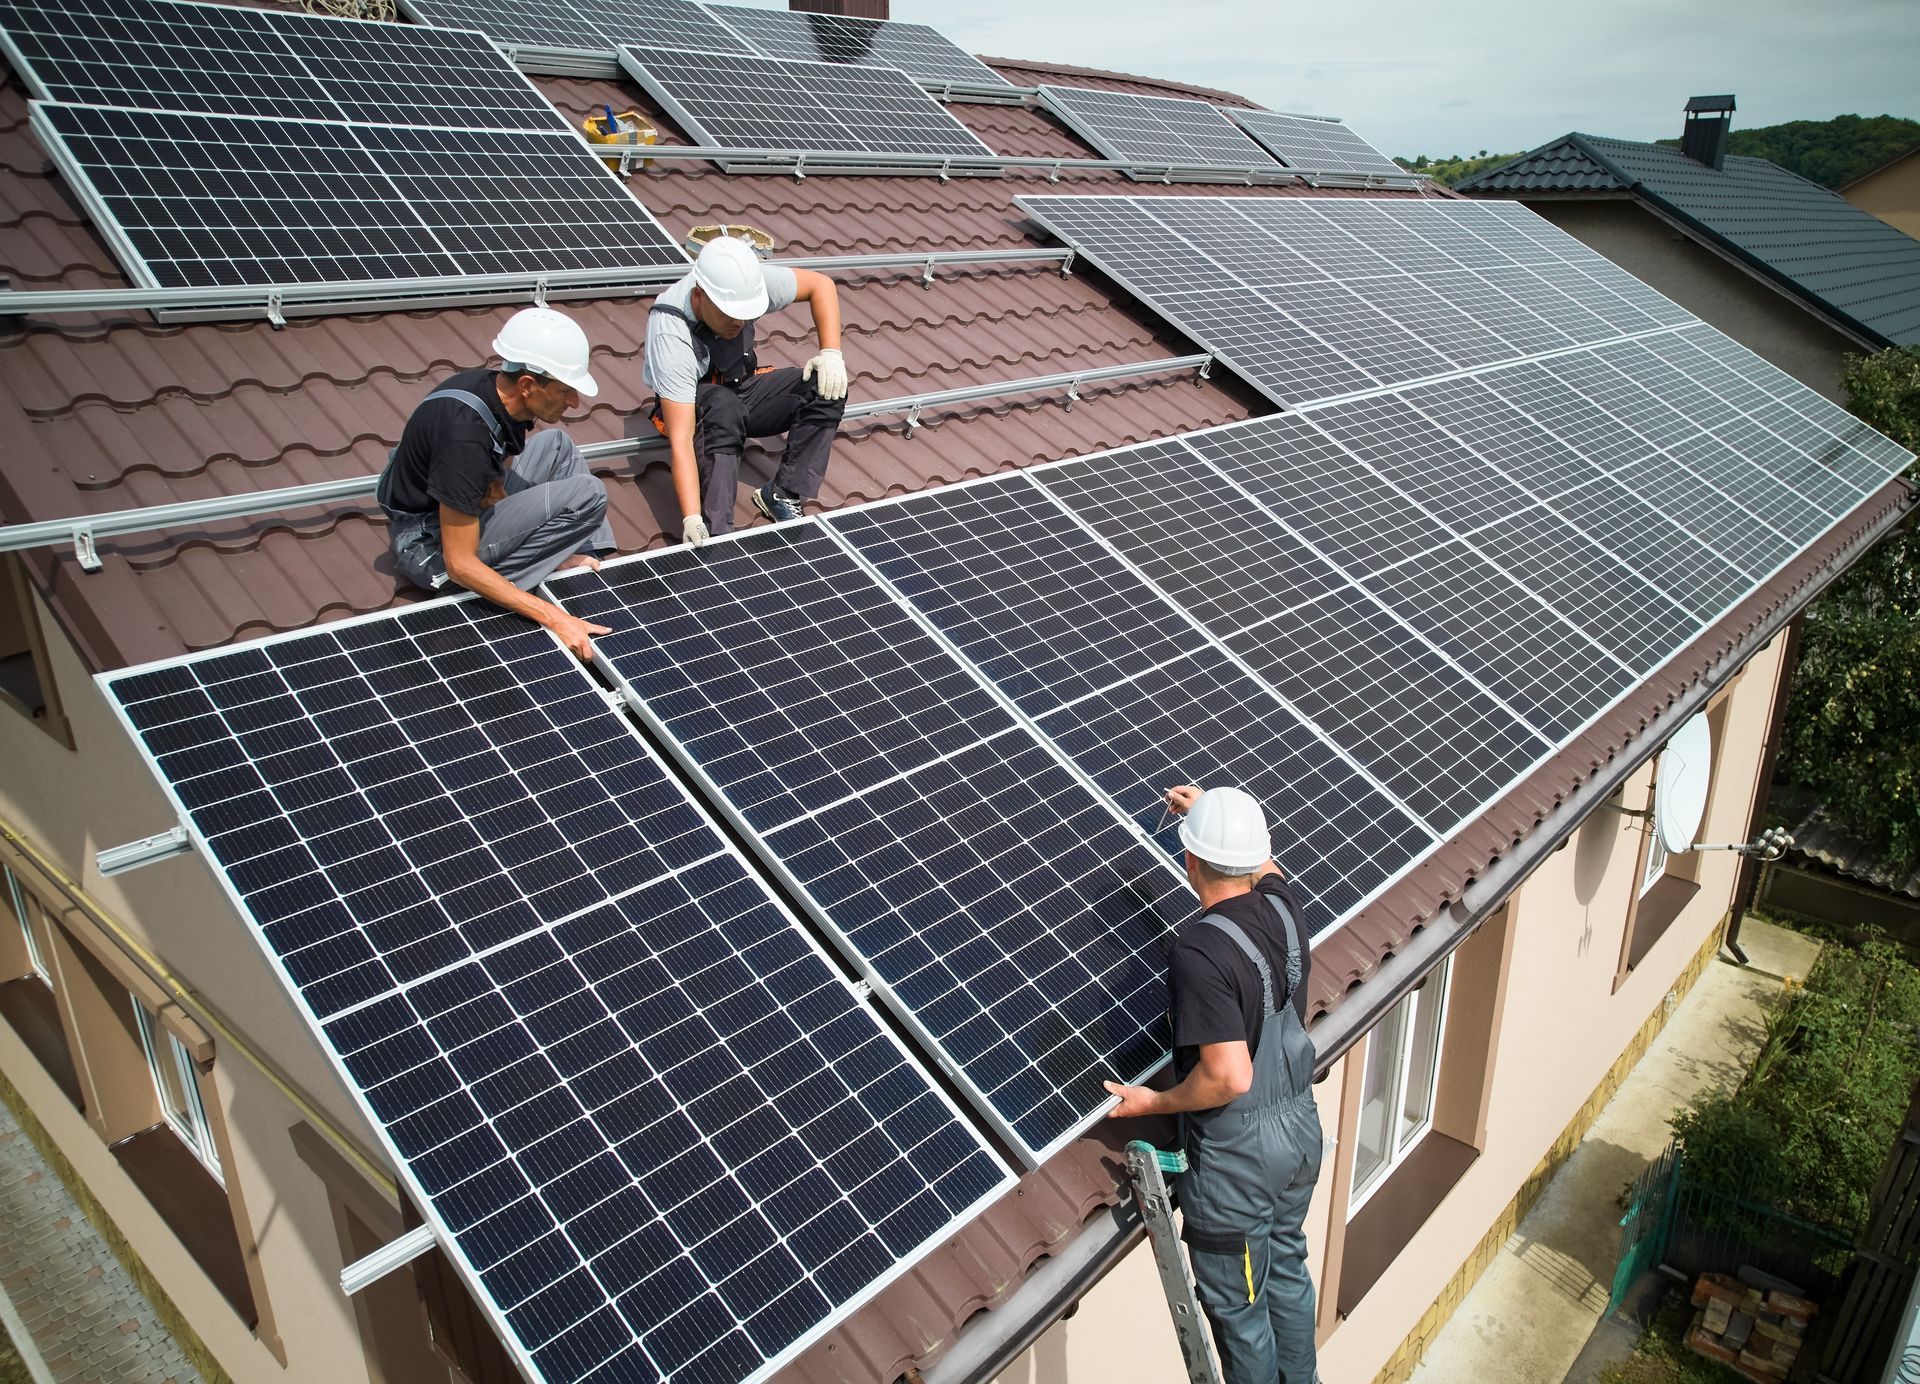 three men are installing solar panels on the roof of a house